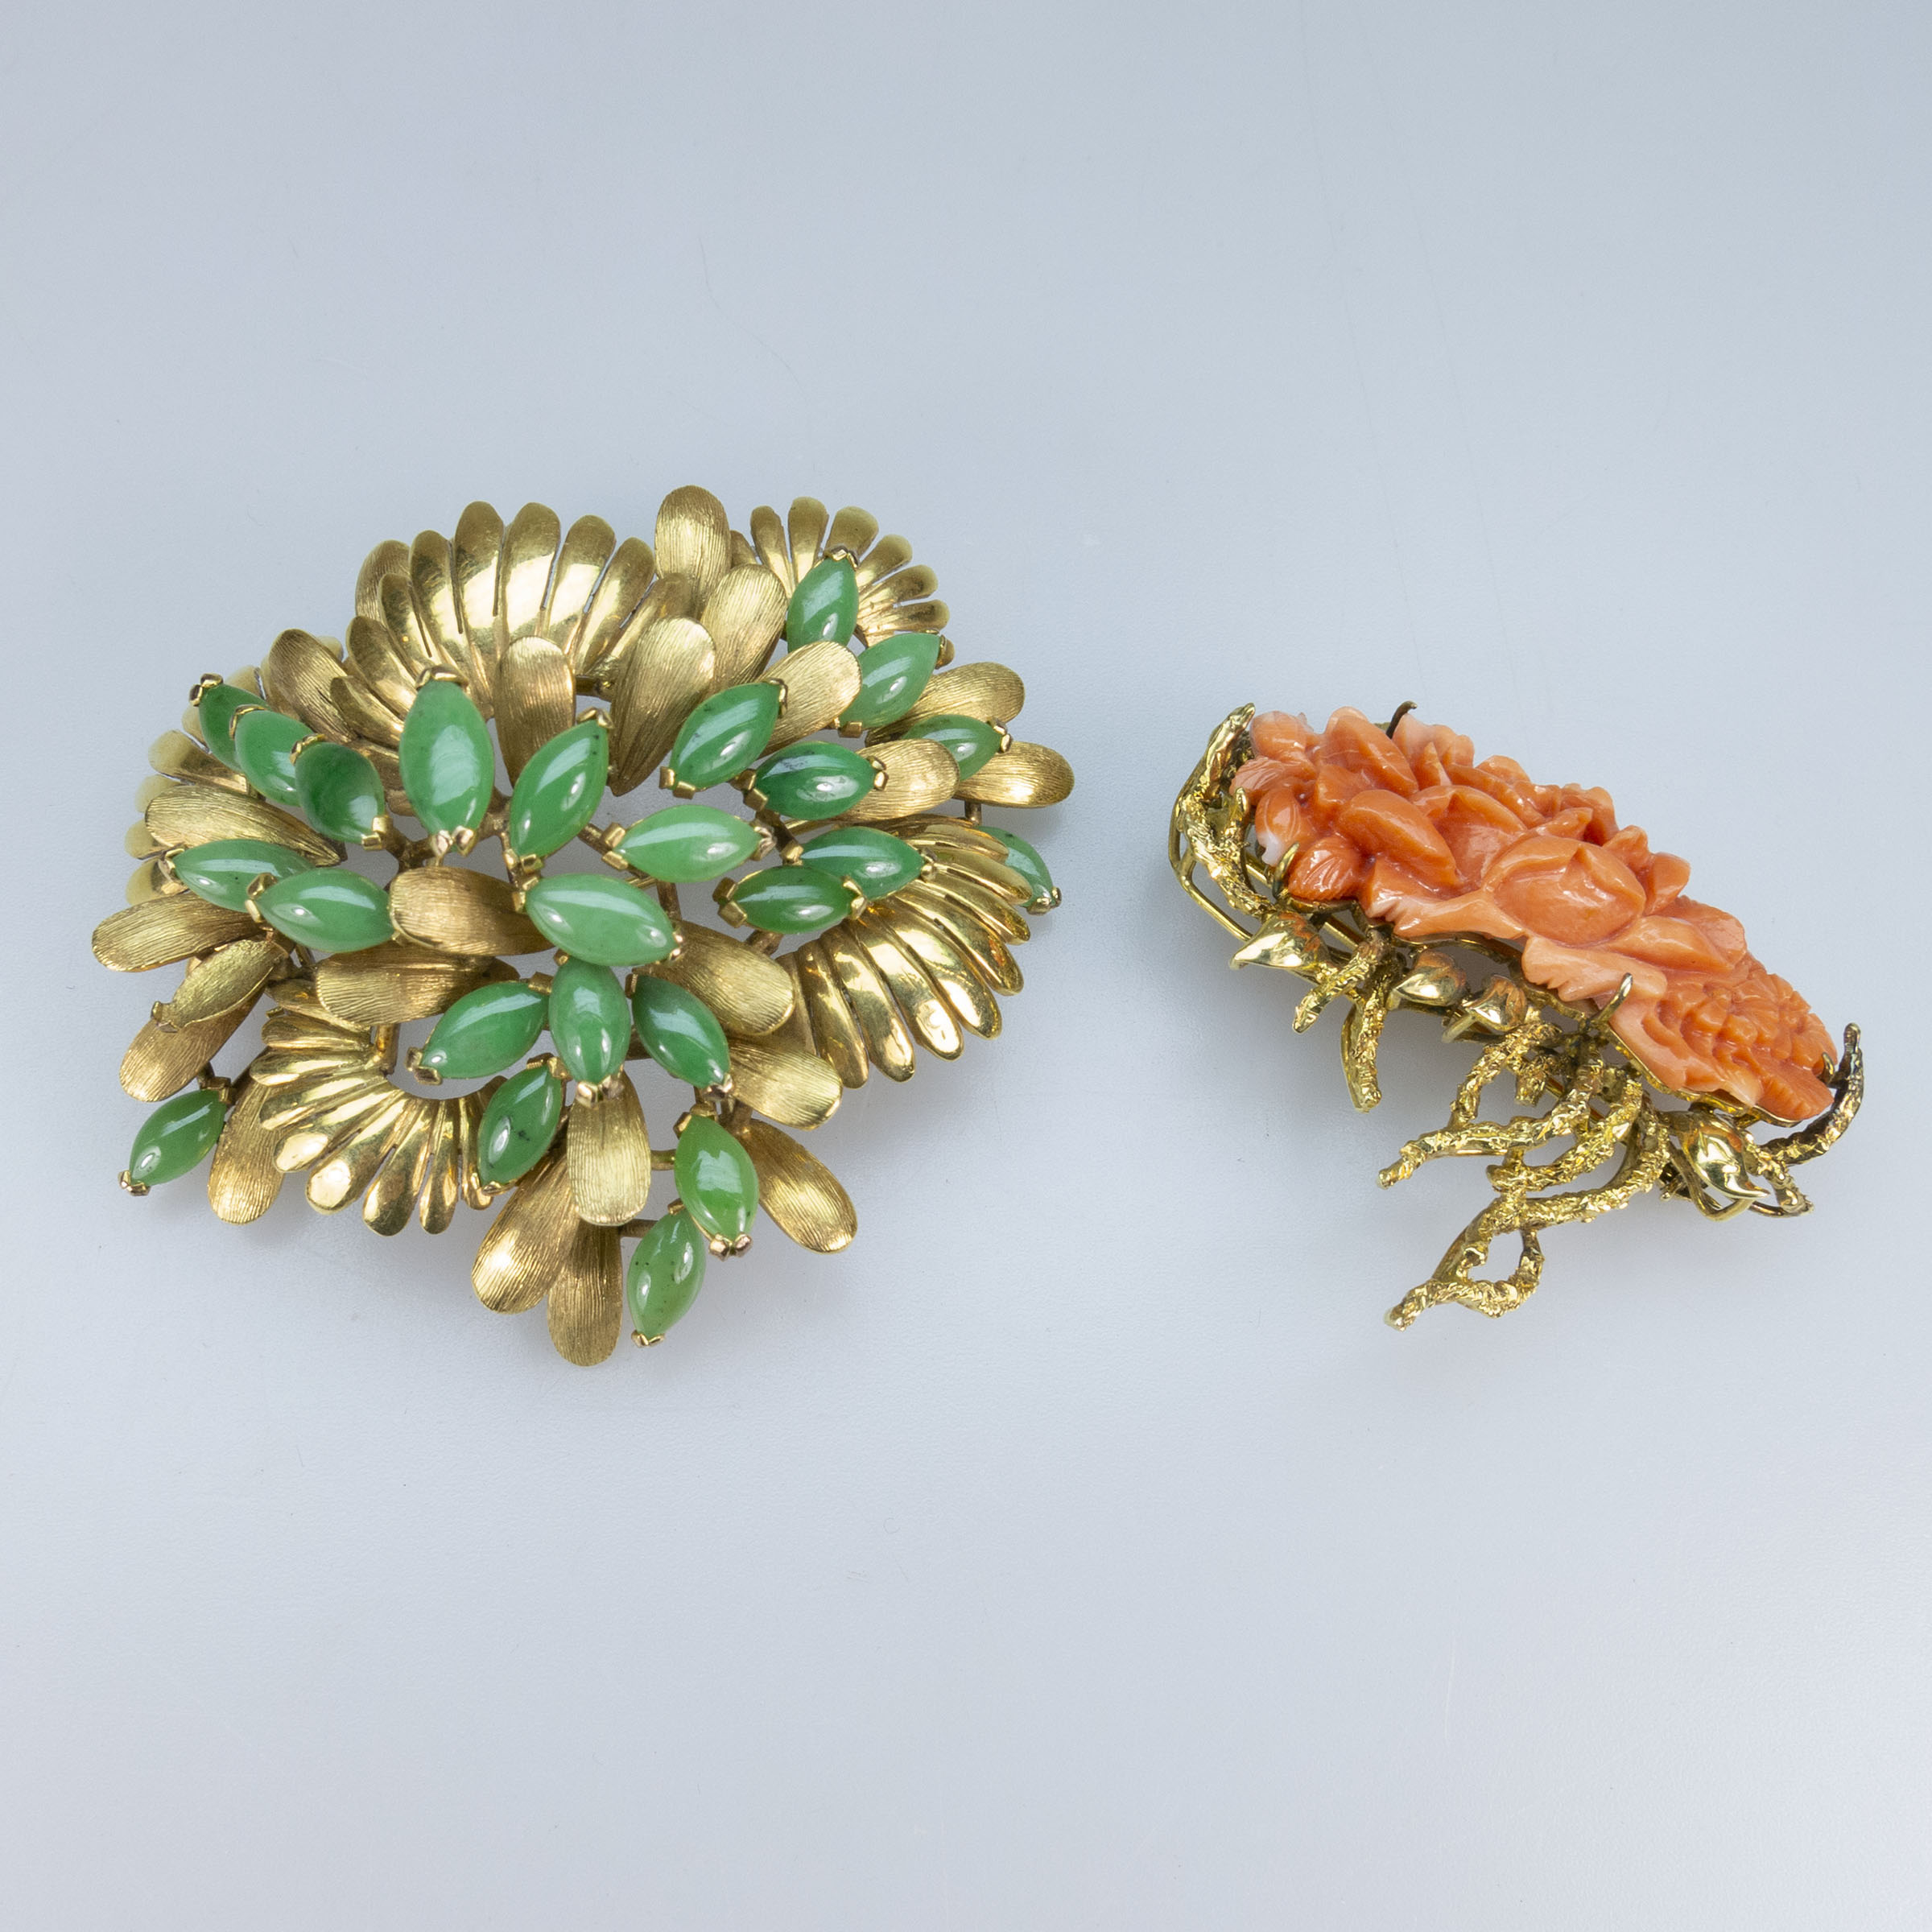 Two Gold Brooches